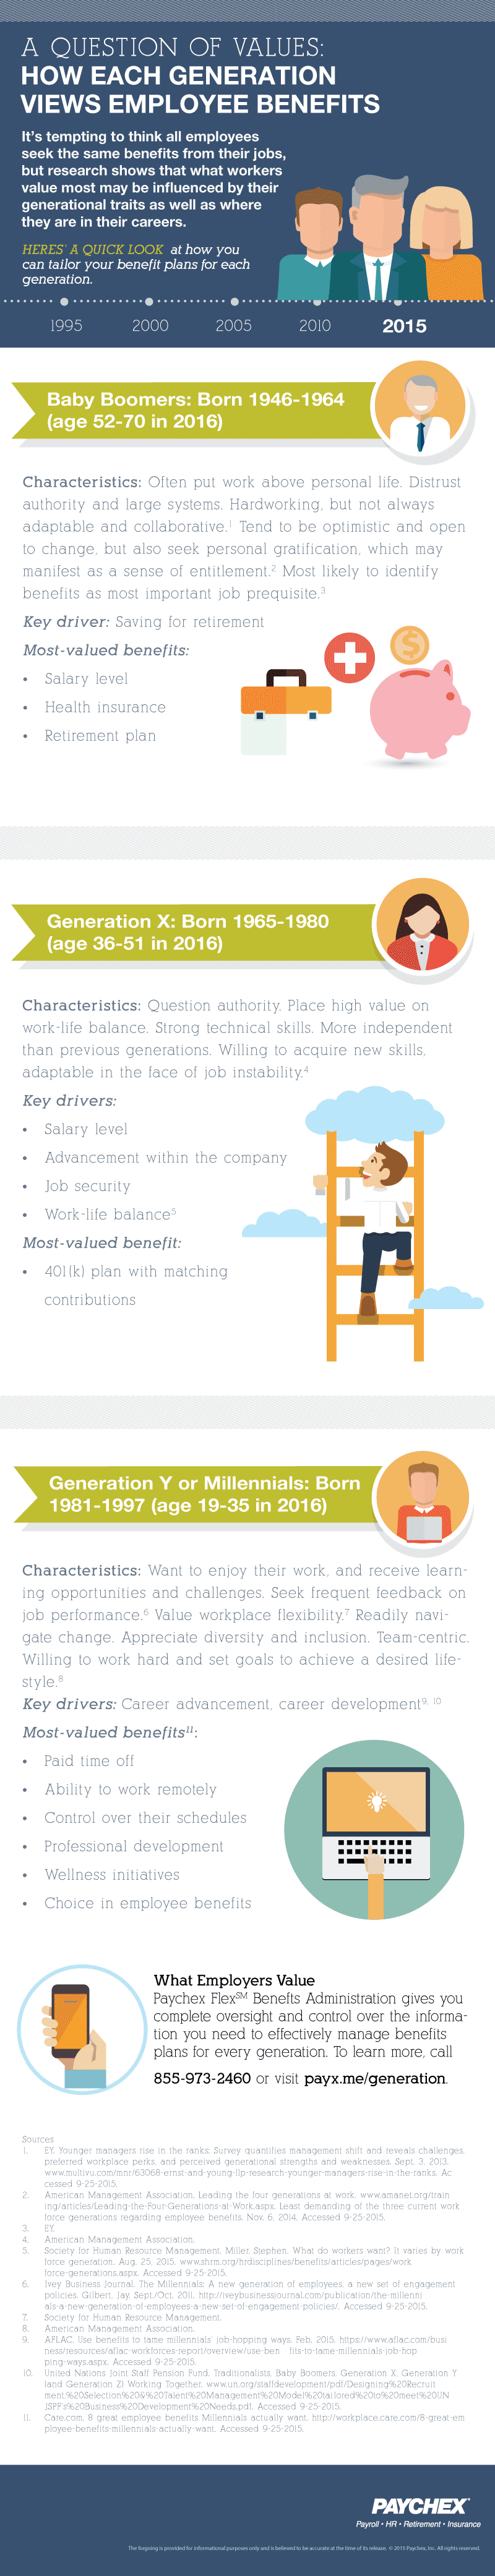 a infographic describing how each generation views employee benefits including baby boomers, generation x, and generation y or millennials